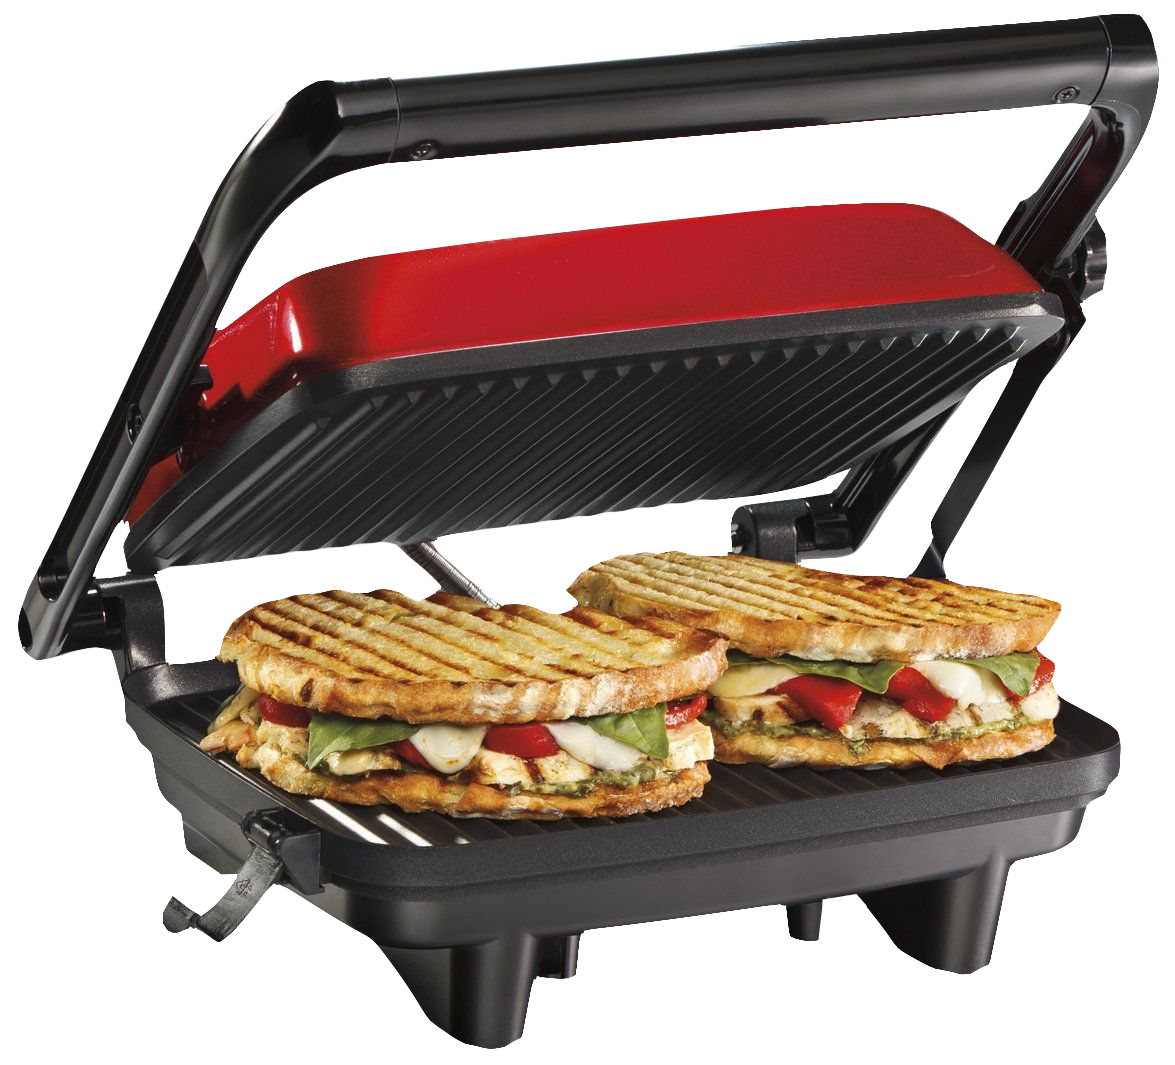 And Grill Sandwich Appliance Grilling Pie Panini Clipart